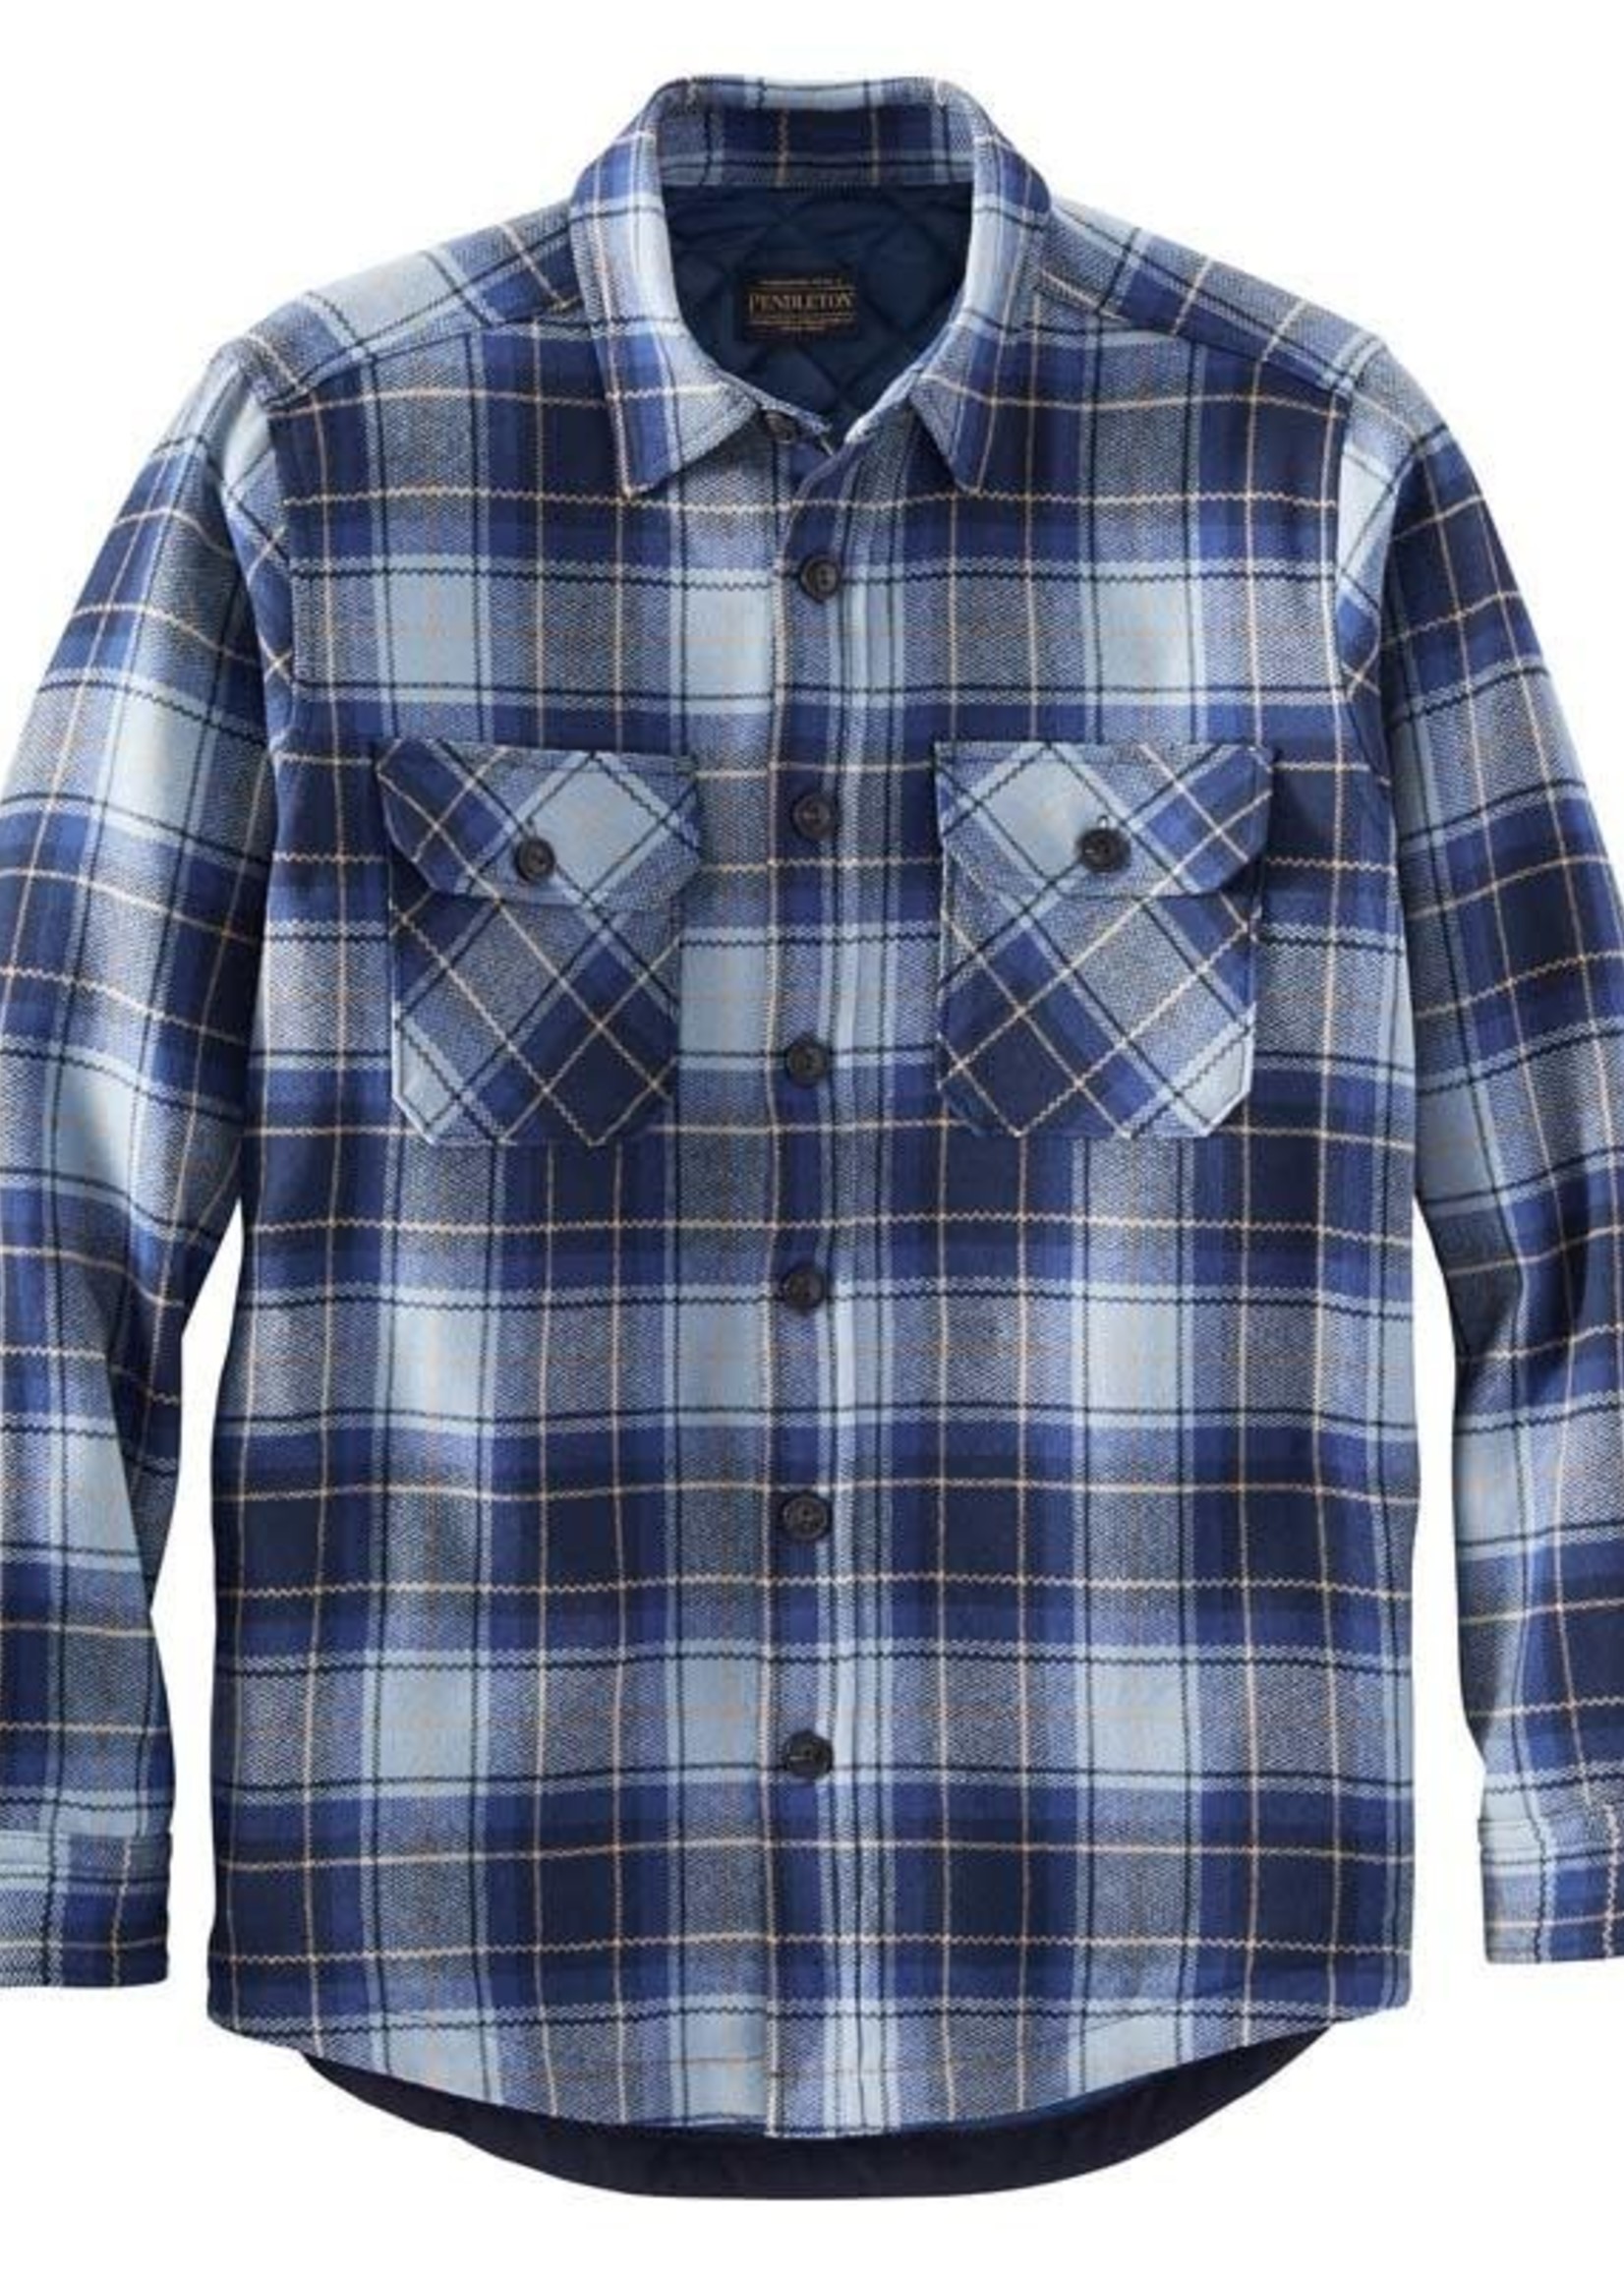 Pendleton Quilted CPO Jacket: Blue Plaid